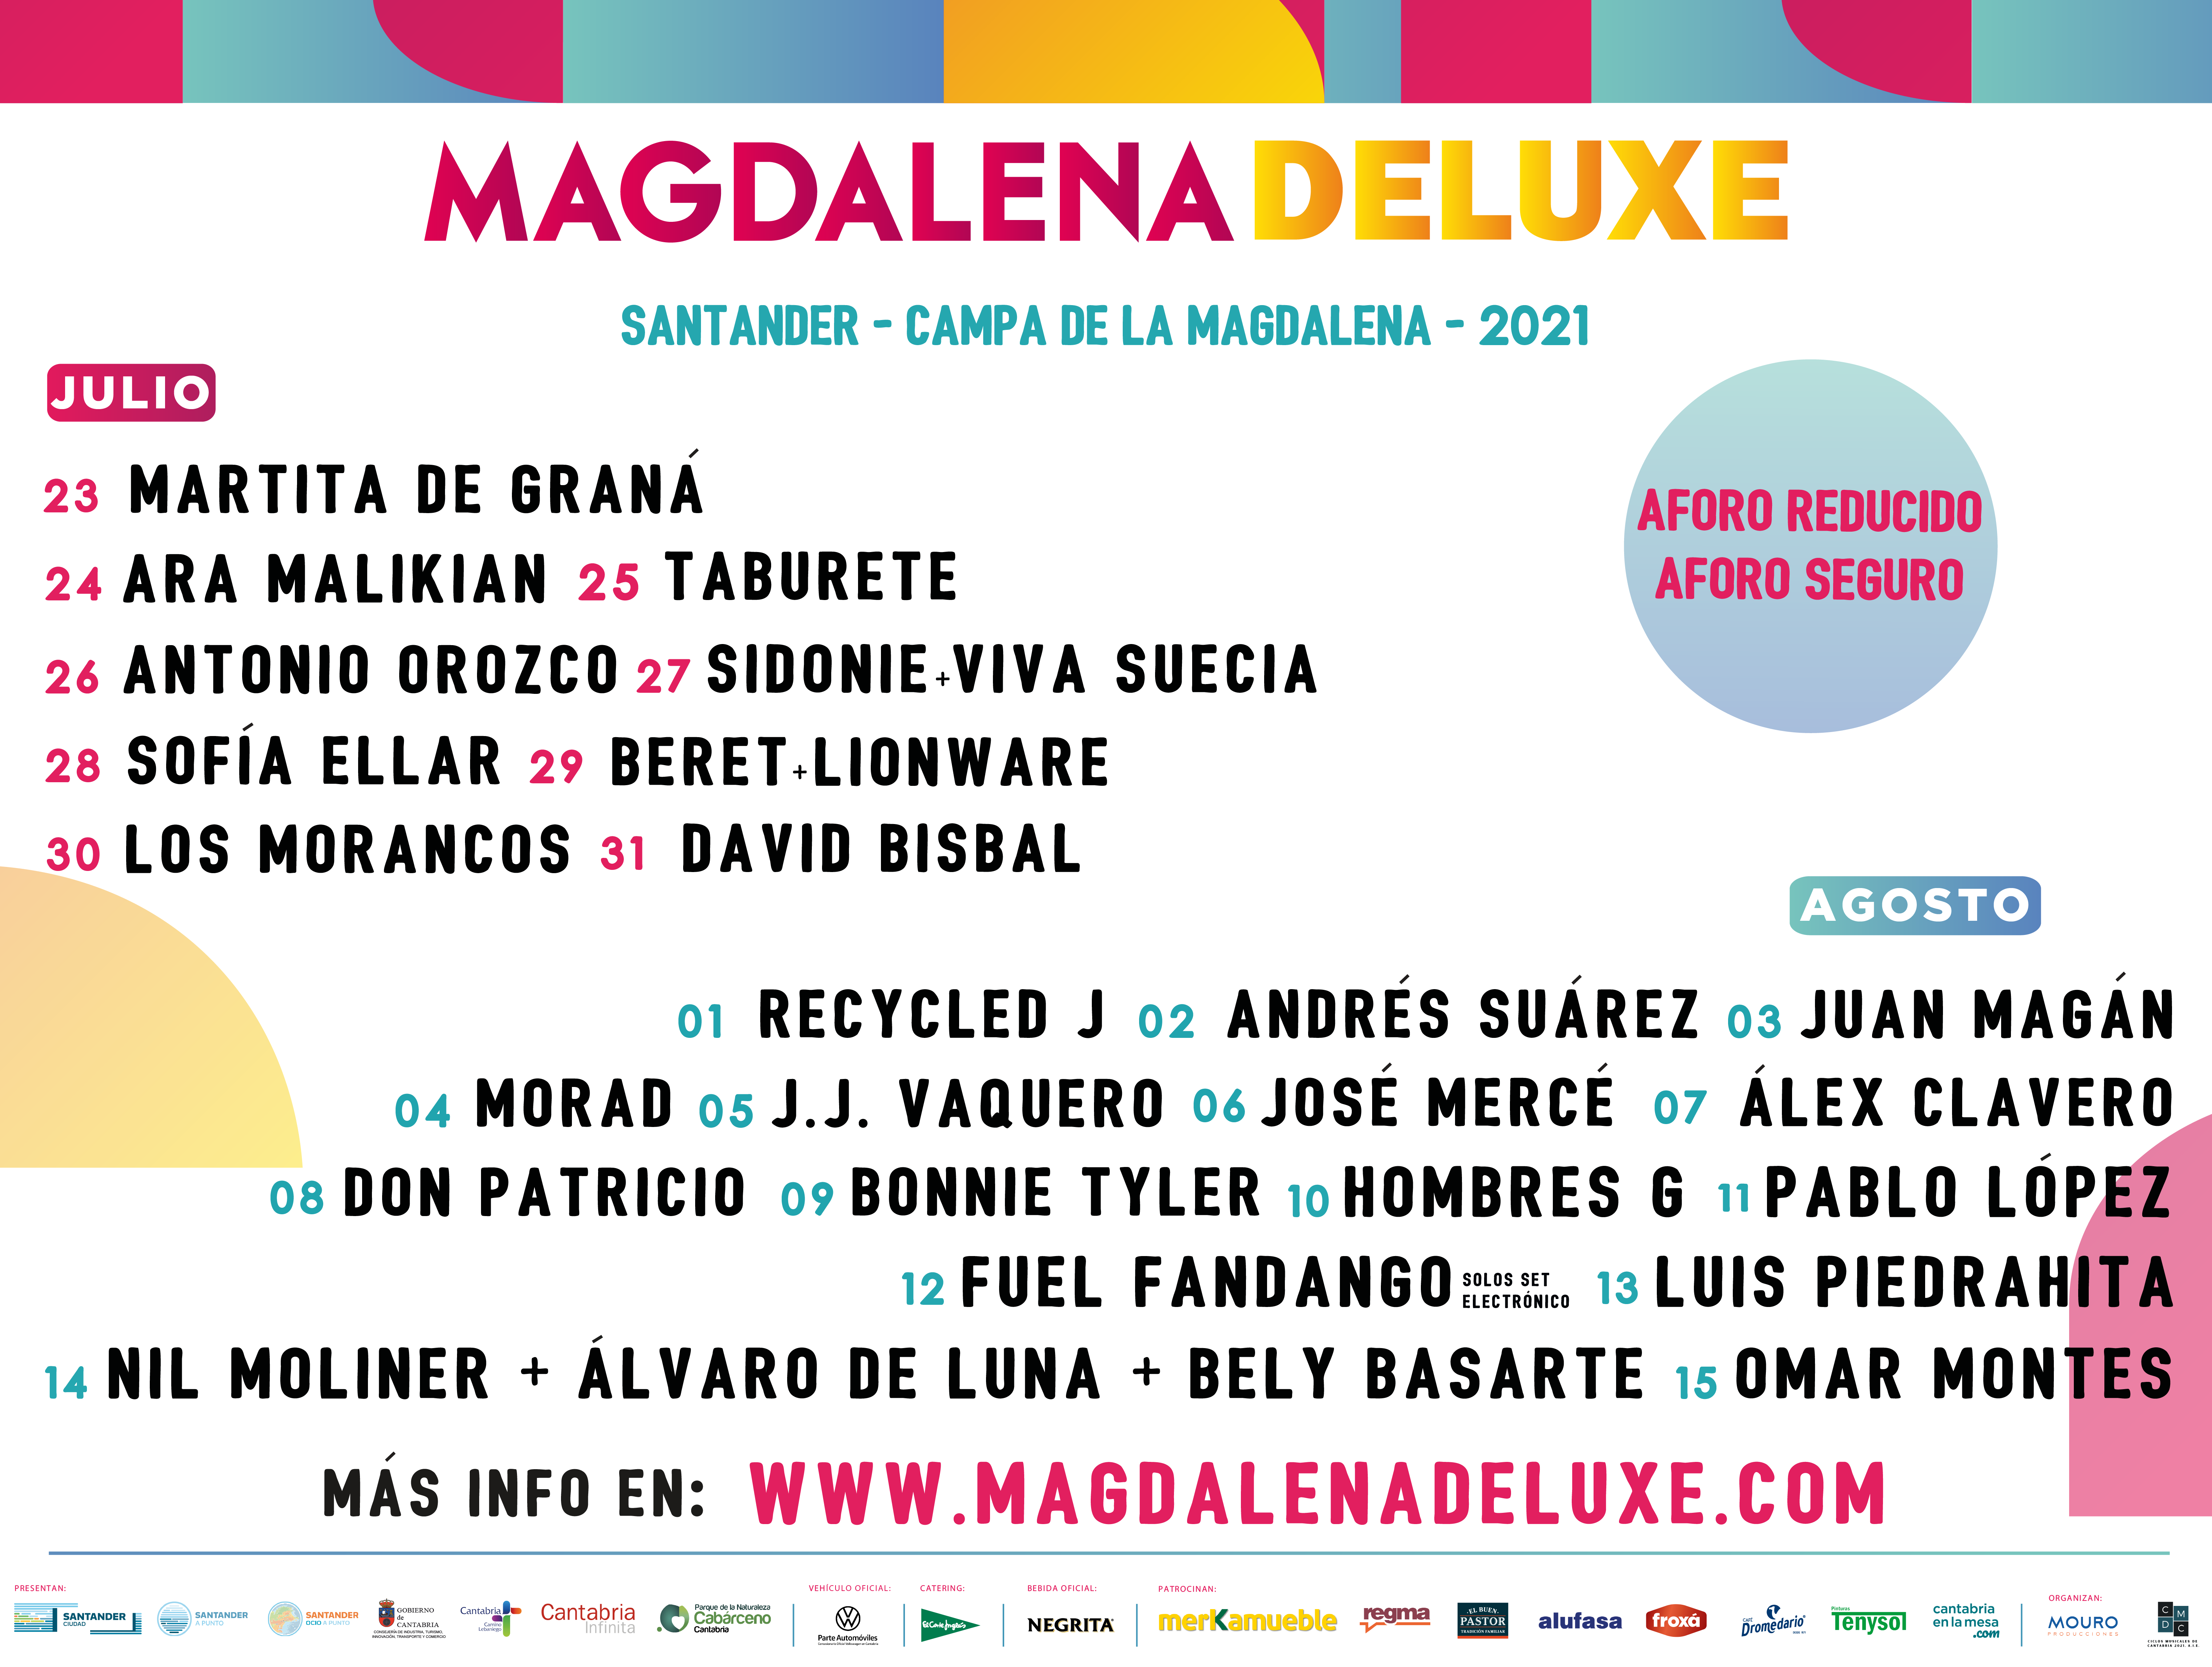 andres-suarez-magdalena-deluxe-2-agosto-60d9aa0c4bb732.35225194.png